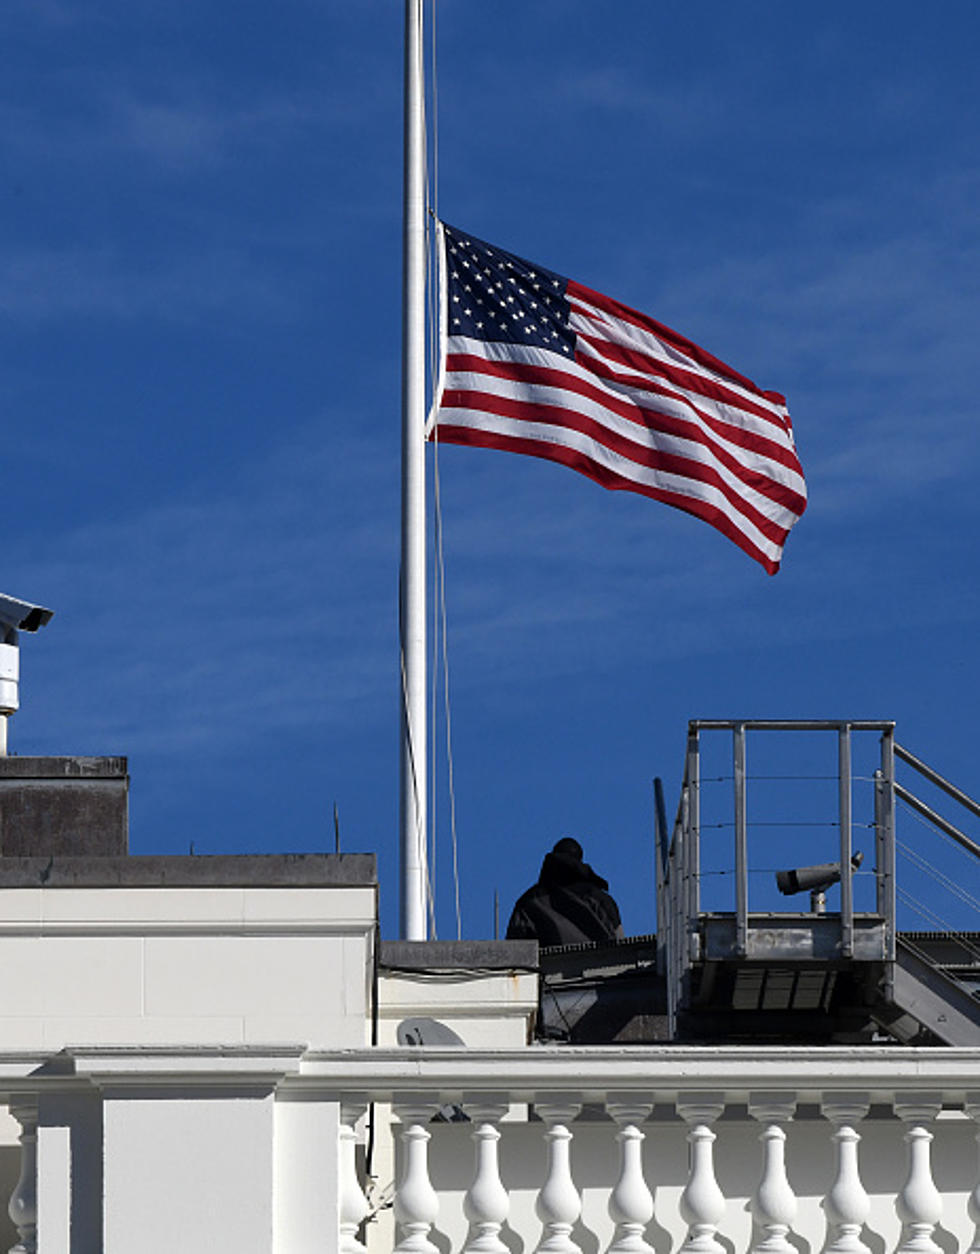 Governor Orders Montana Flags at Half-Staff for Stevens